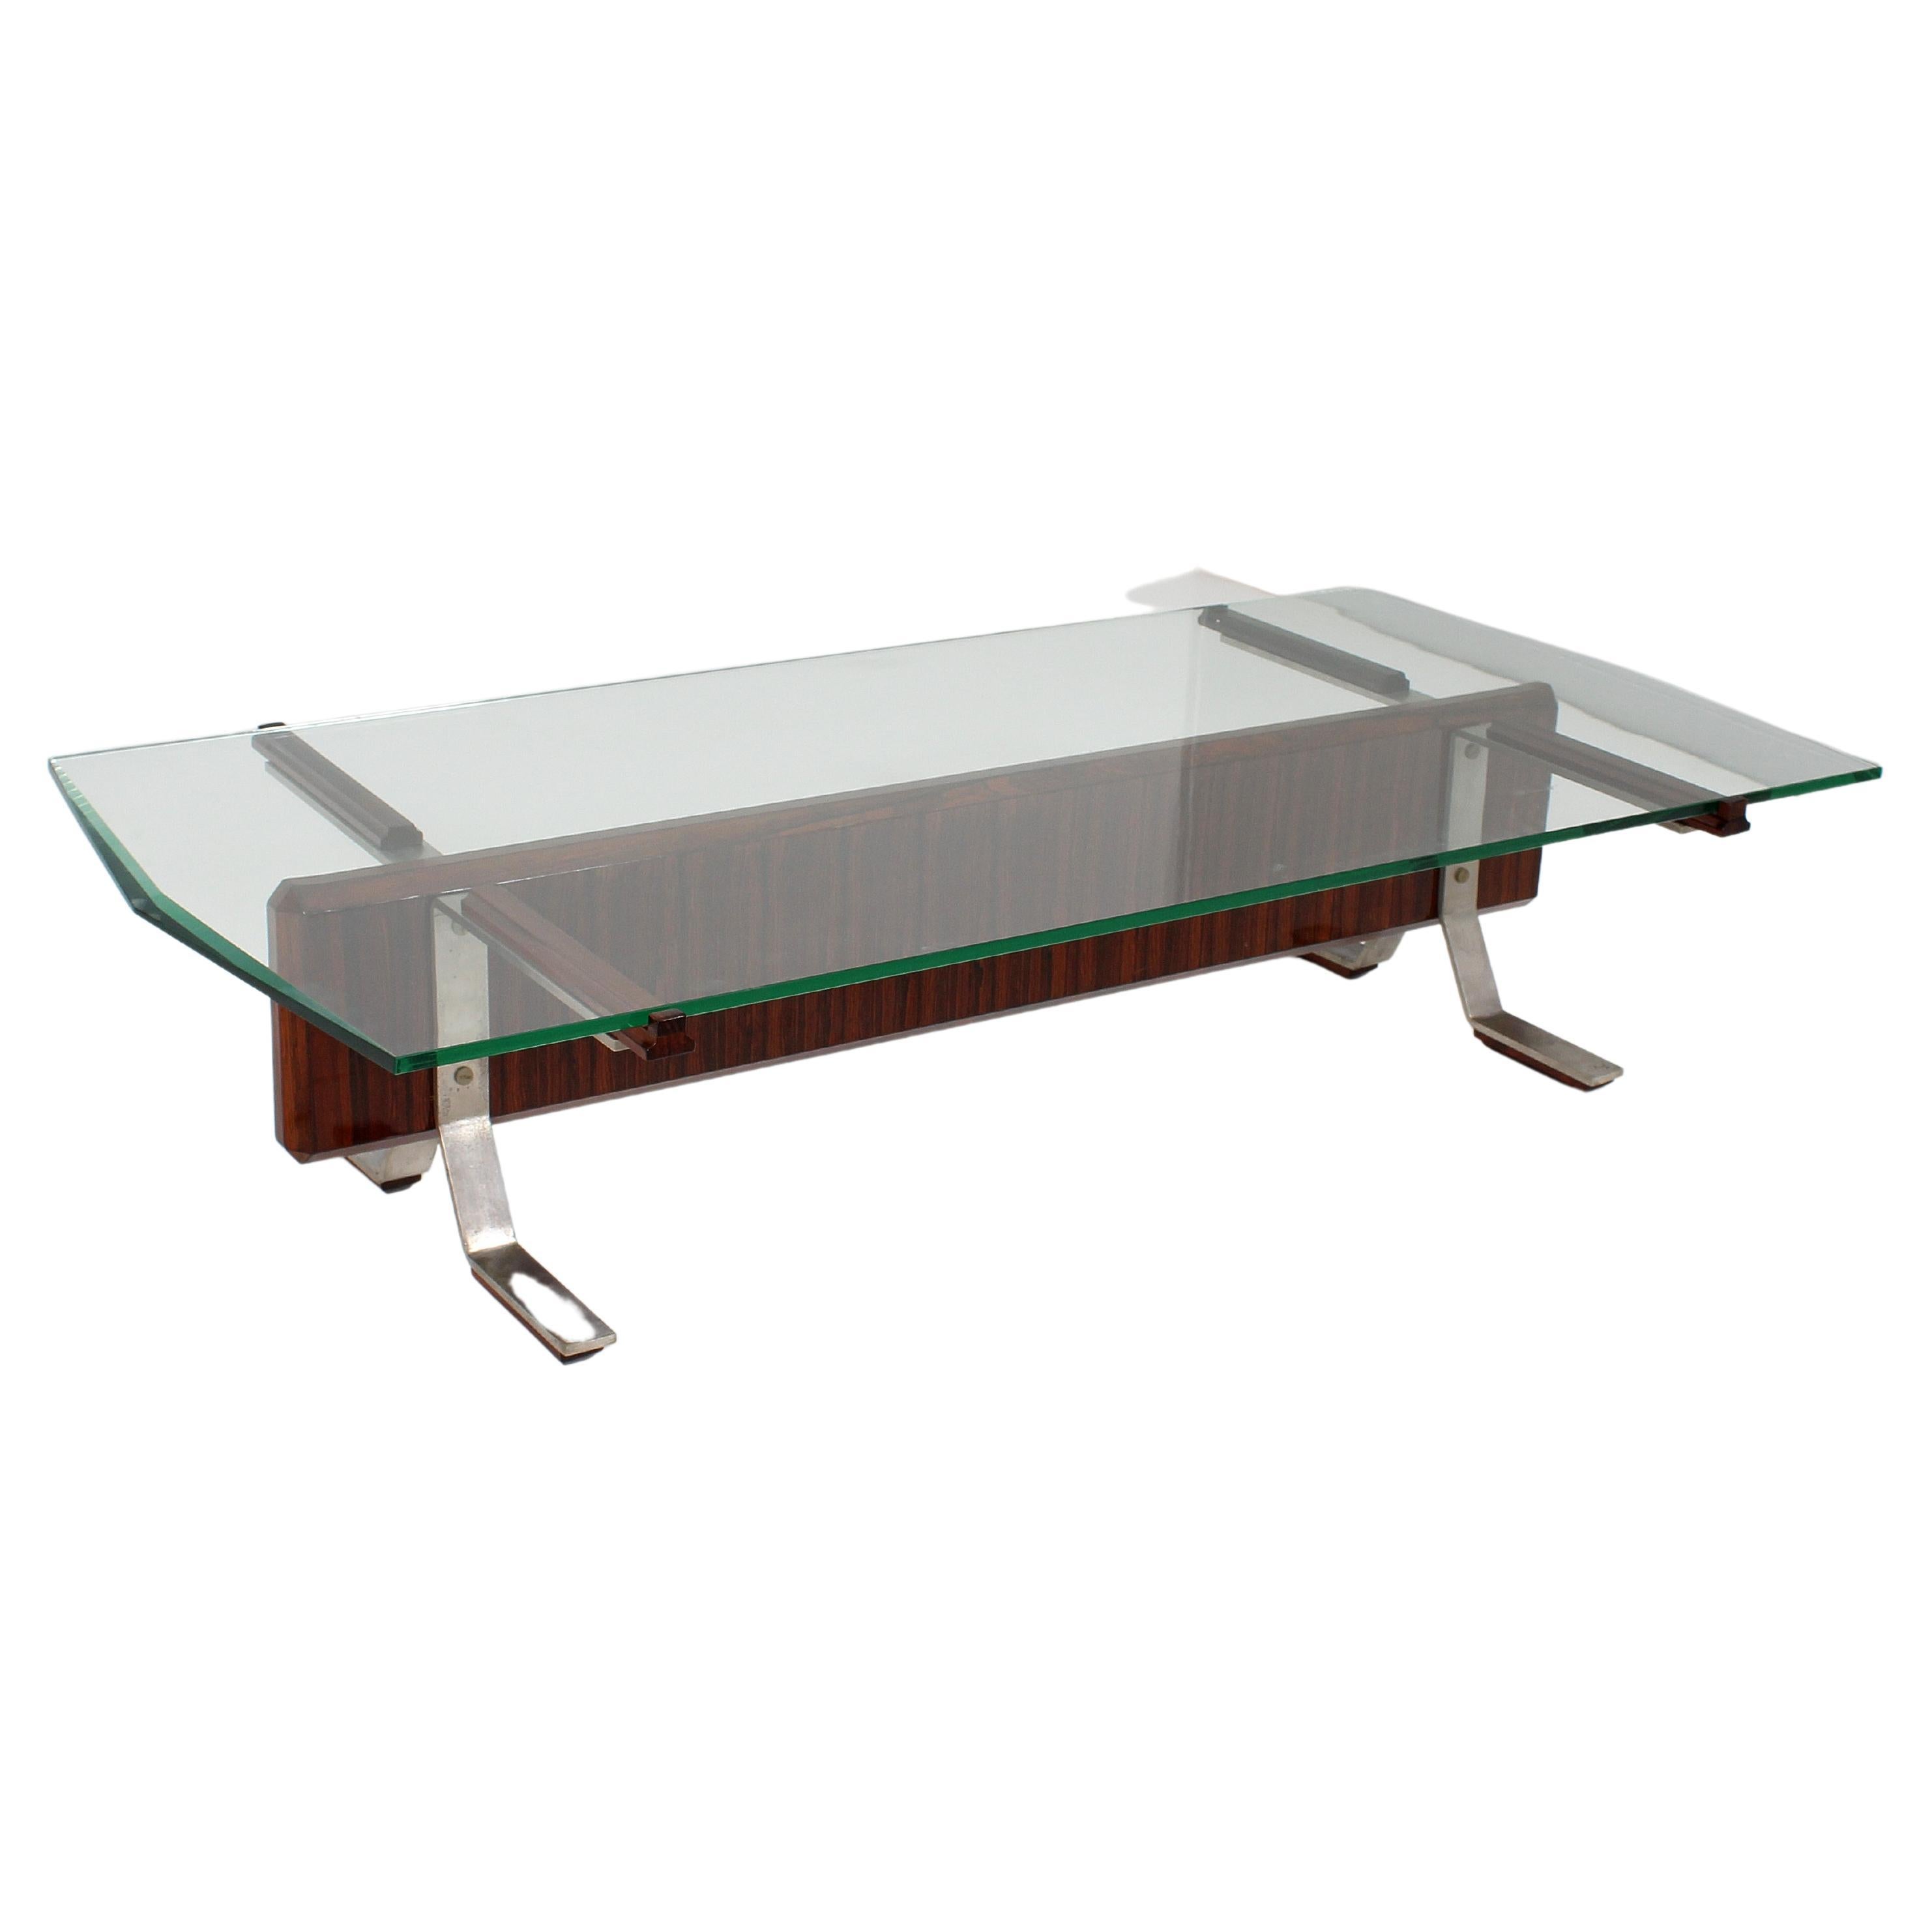 Elegant geometric coffee table with shaped top in ground glass with lateral facets, wooden structure with supports in bent steel bars. Present label with trademark. Production Mim Roma, attributable to Ico Parisi, Italy 60s. Restored.
Wear